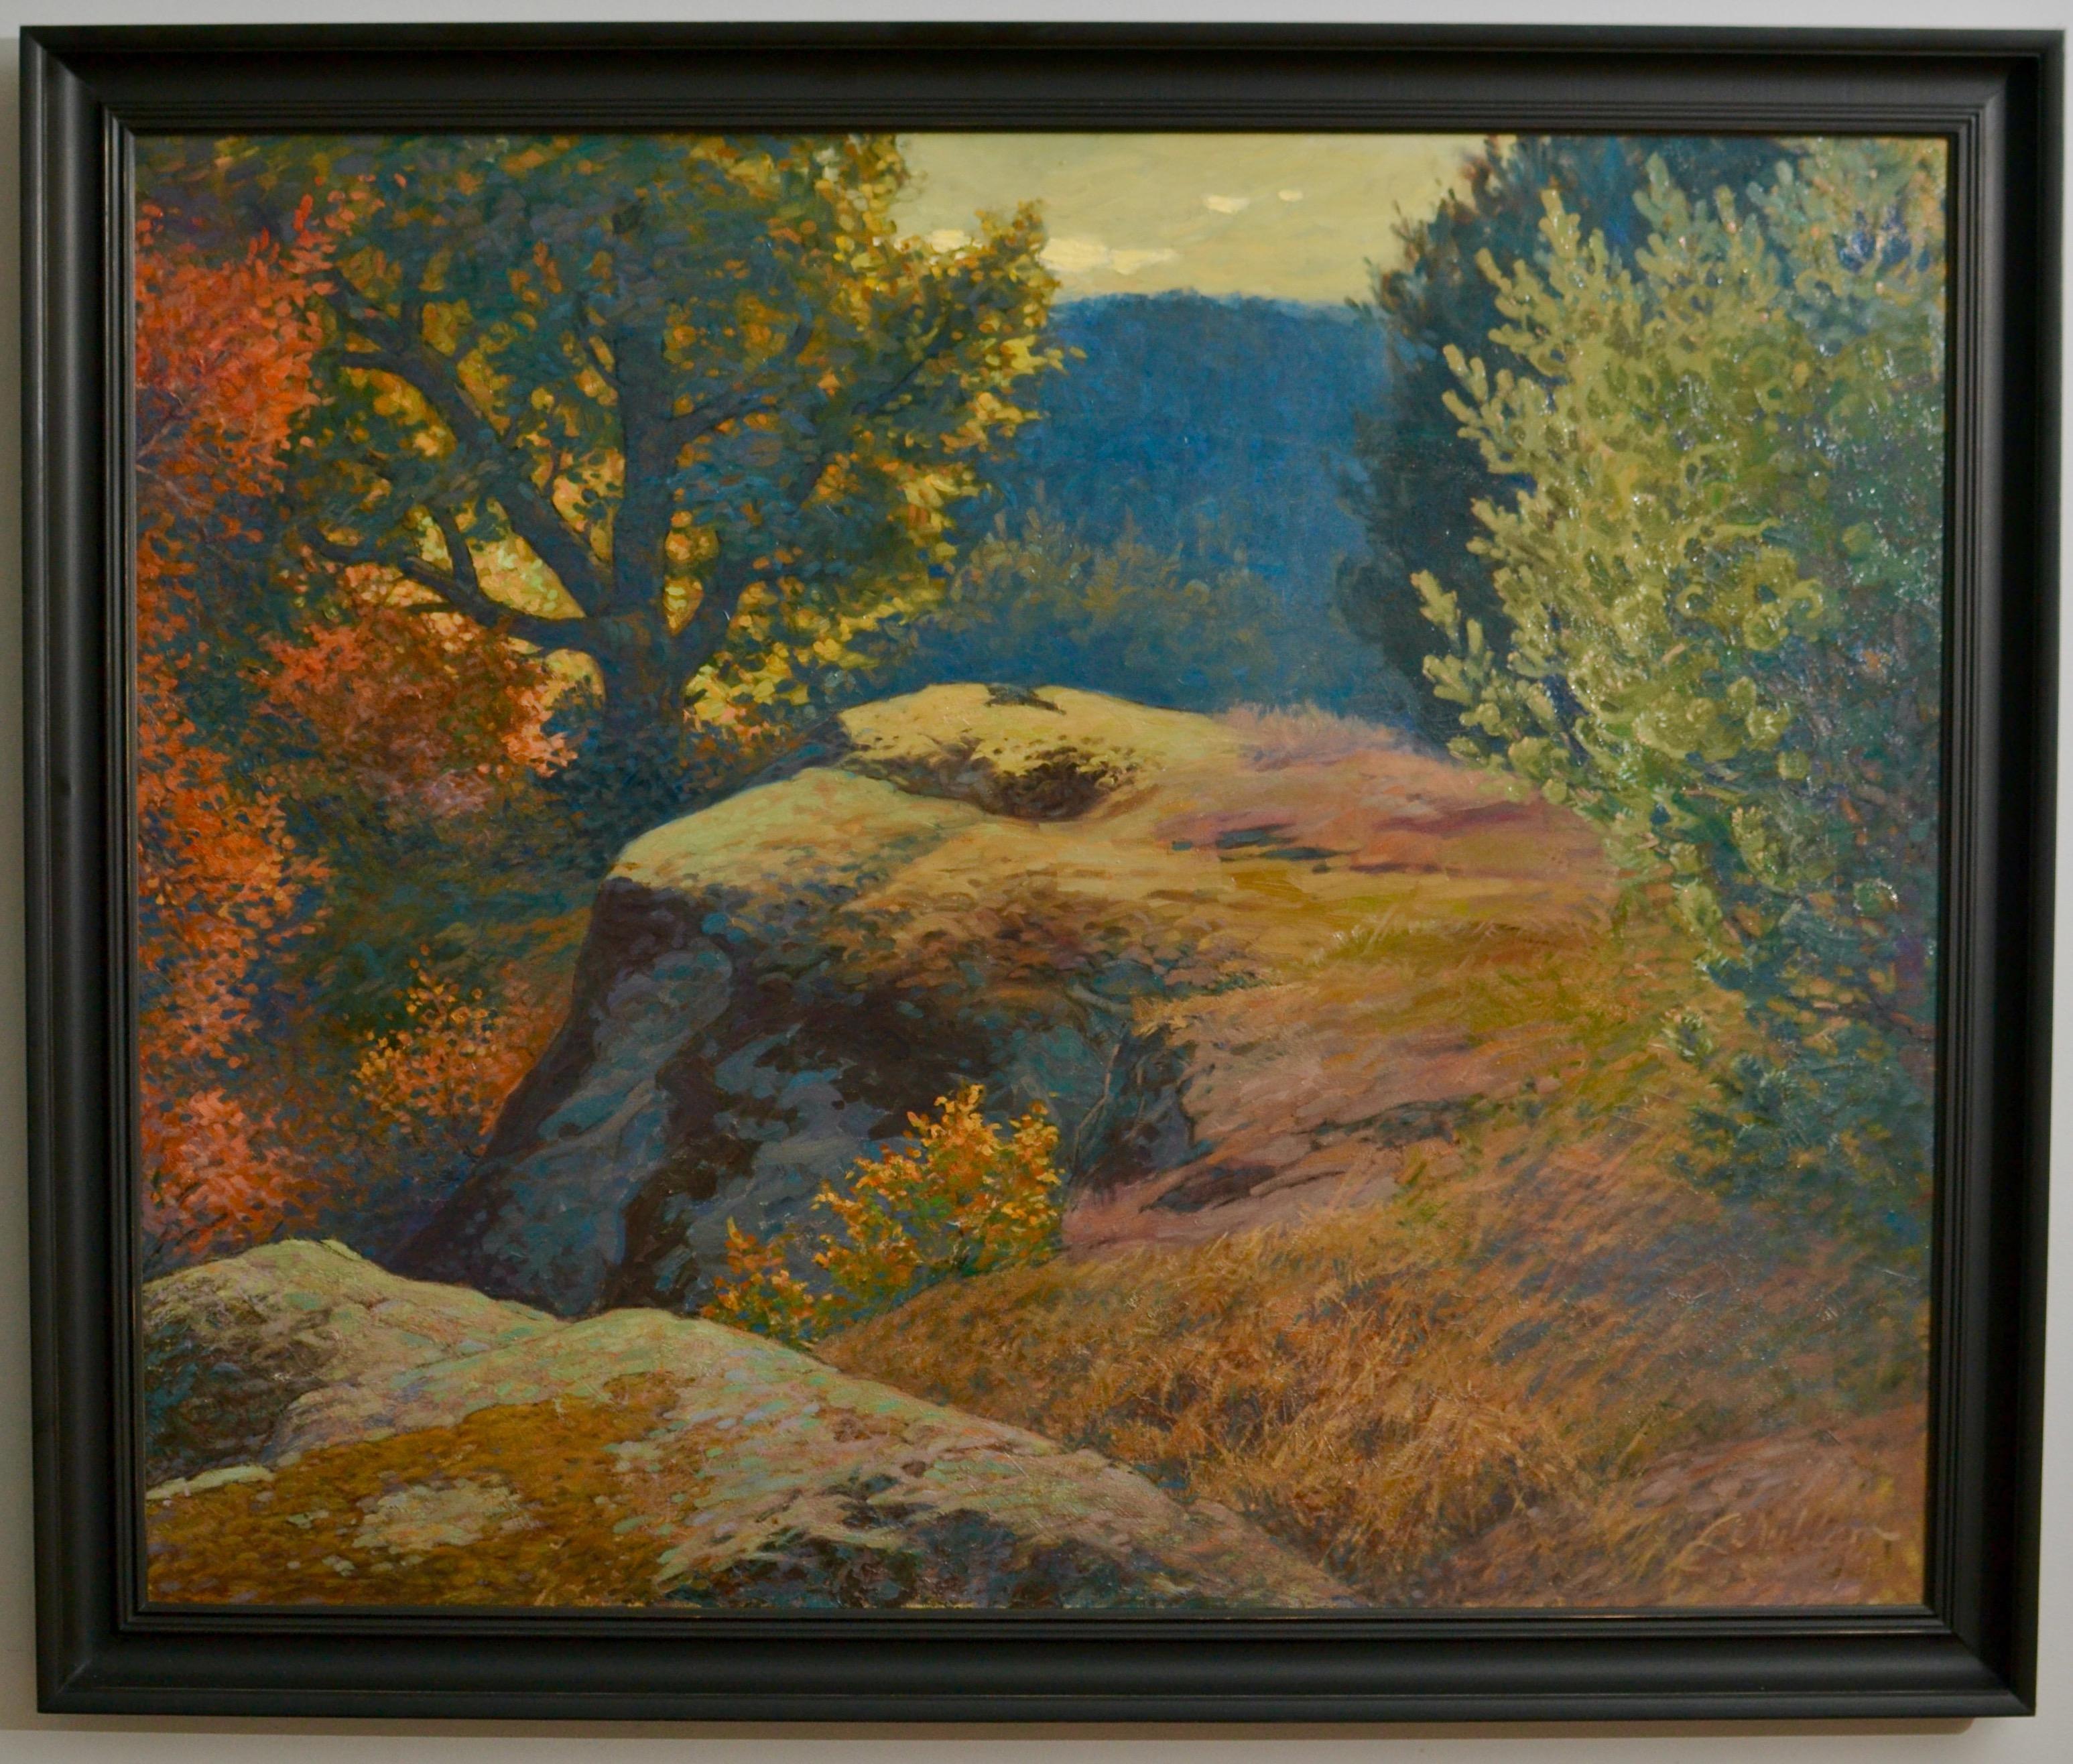 Lennart Nyblom, Fall Sunset Landscape with Trees and Bushes on a Rocky Hill  - Naturalistic Painting by Ture Lennart Nyblom